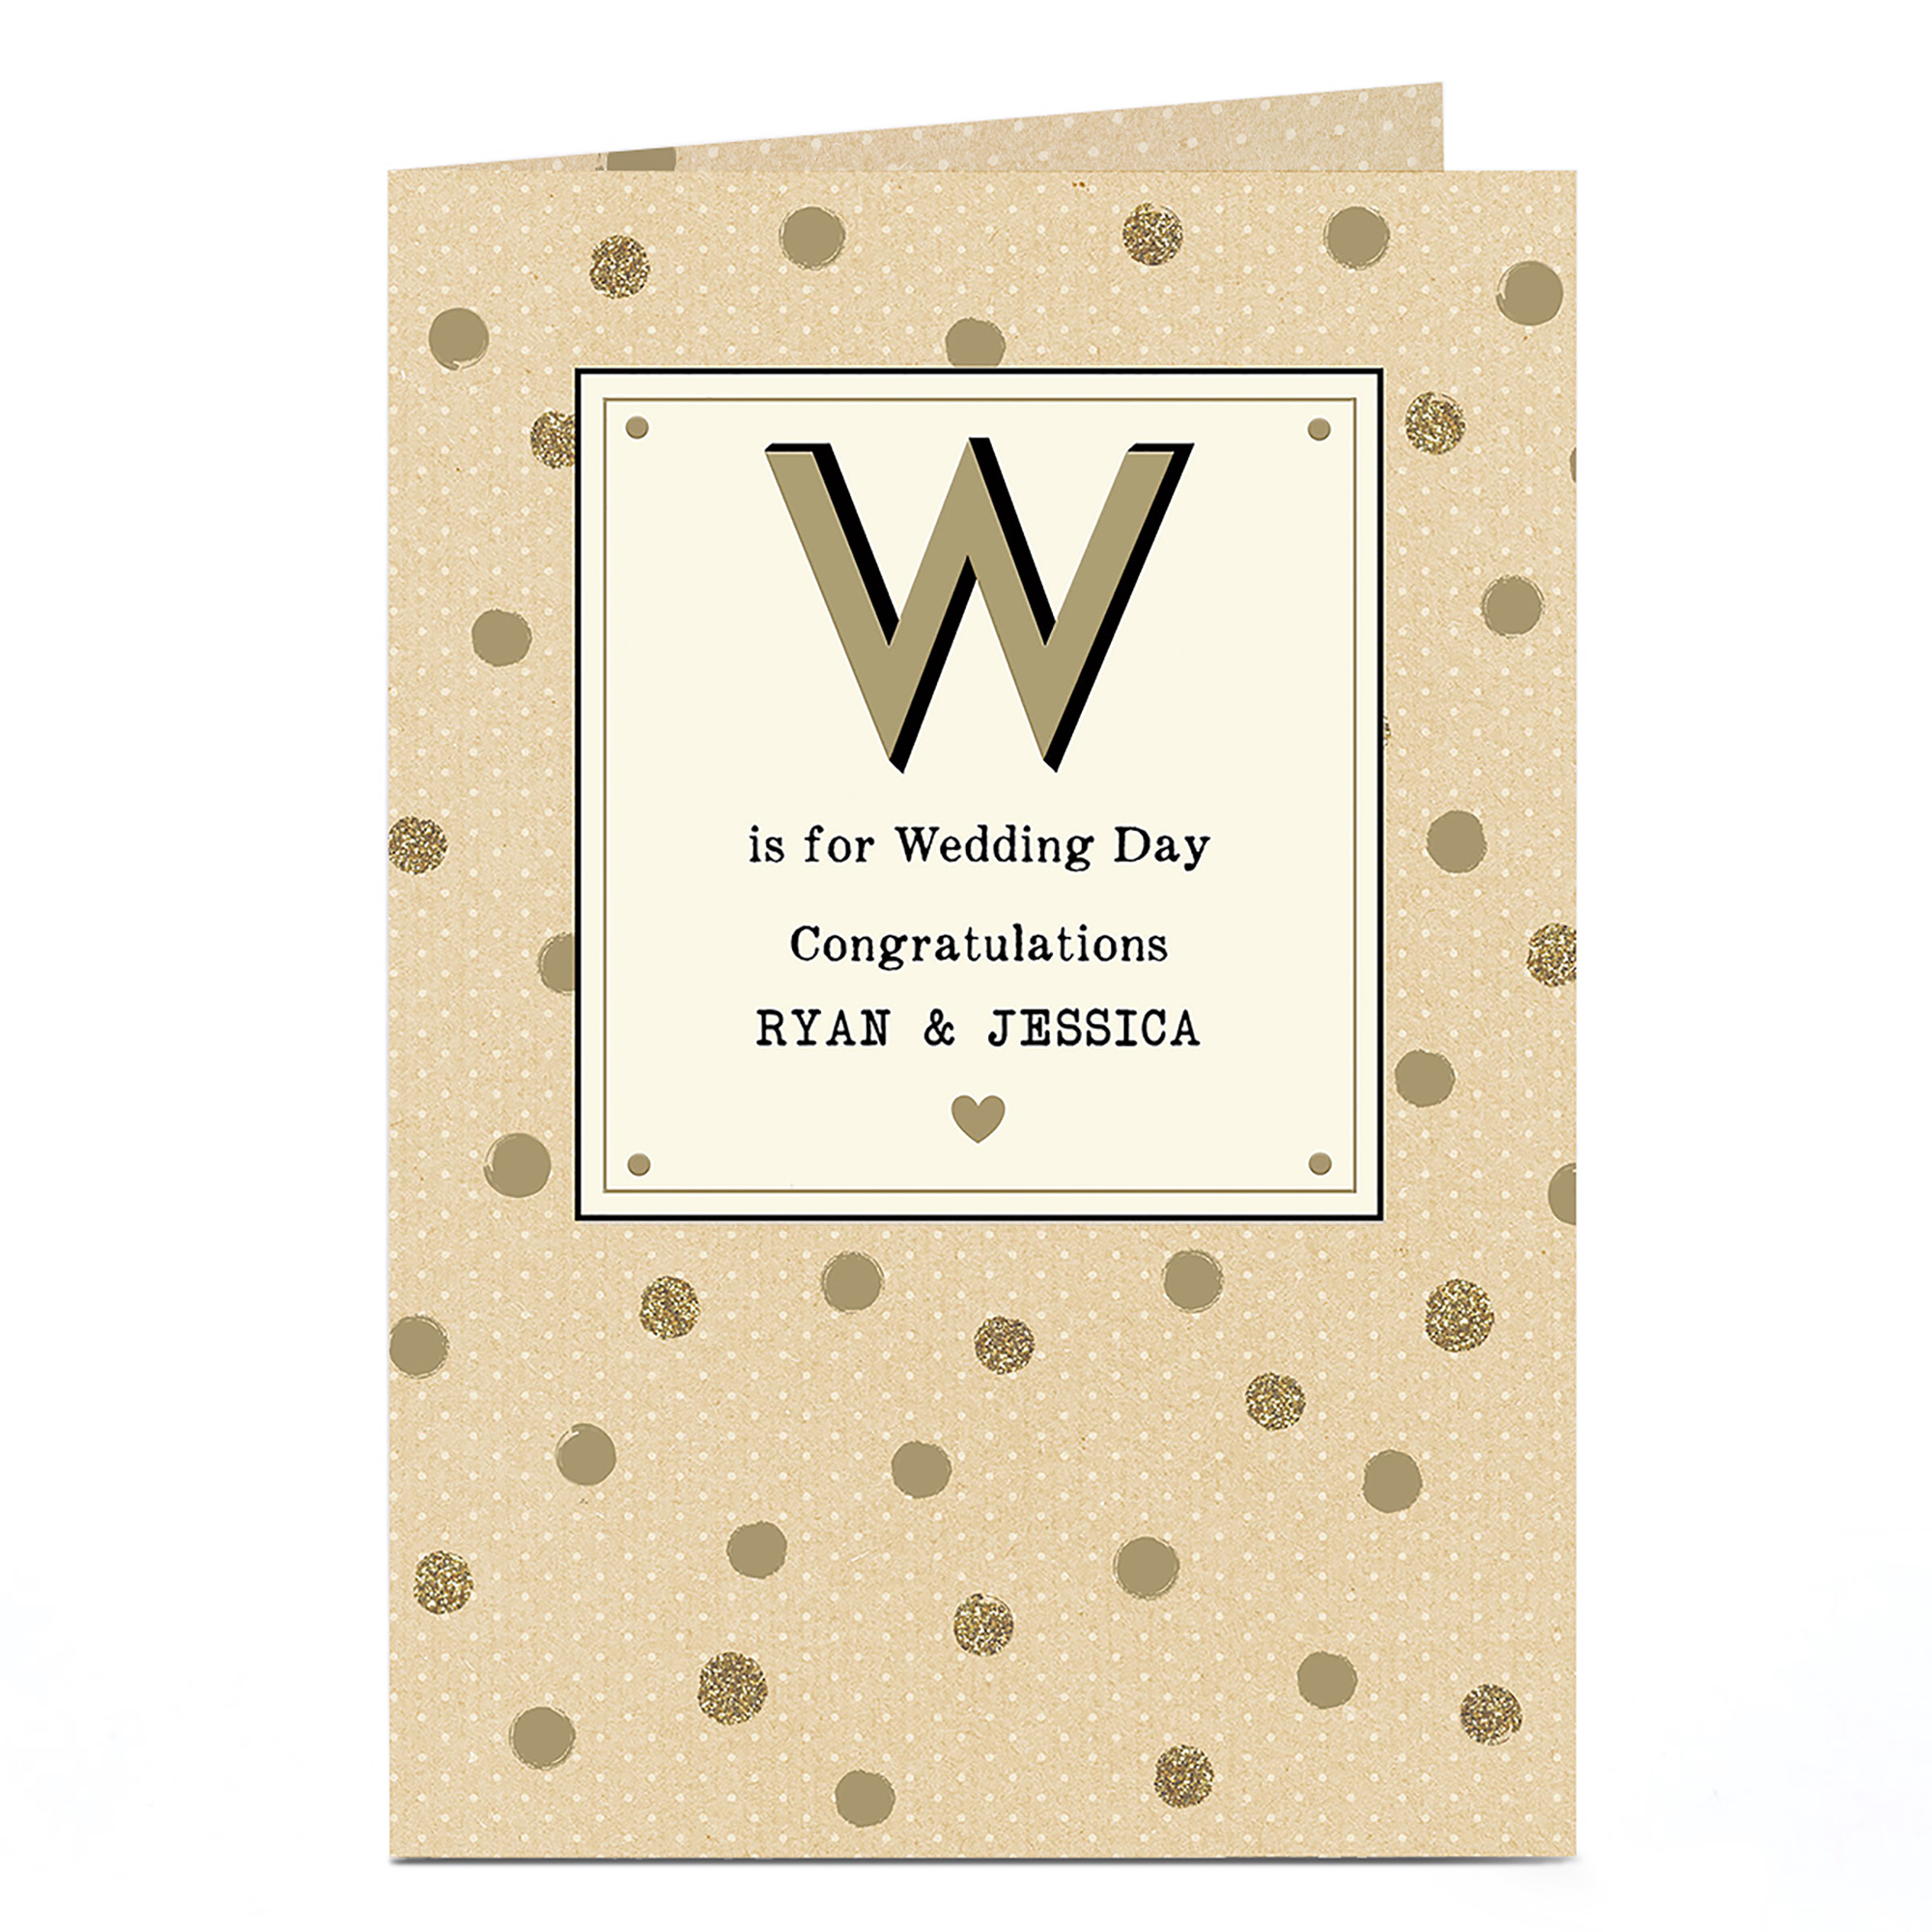 Personalised Wedding Card - W is for Wedding